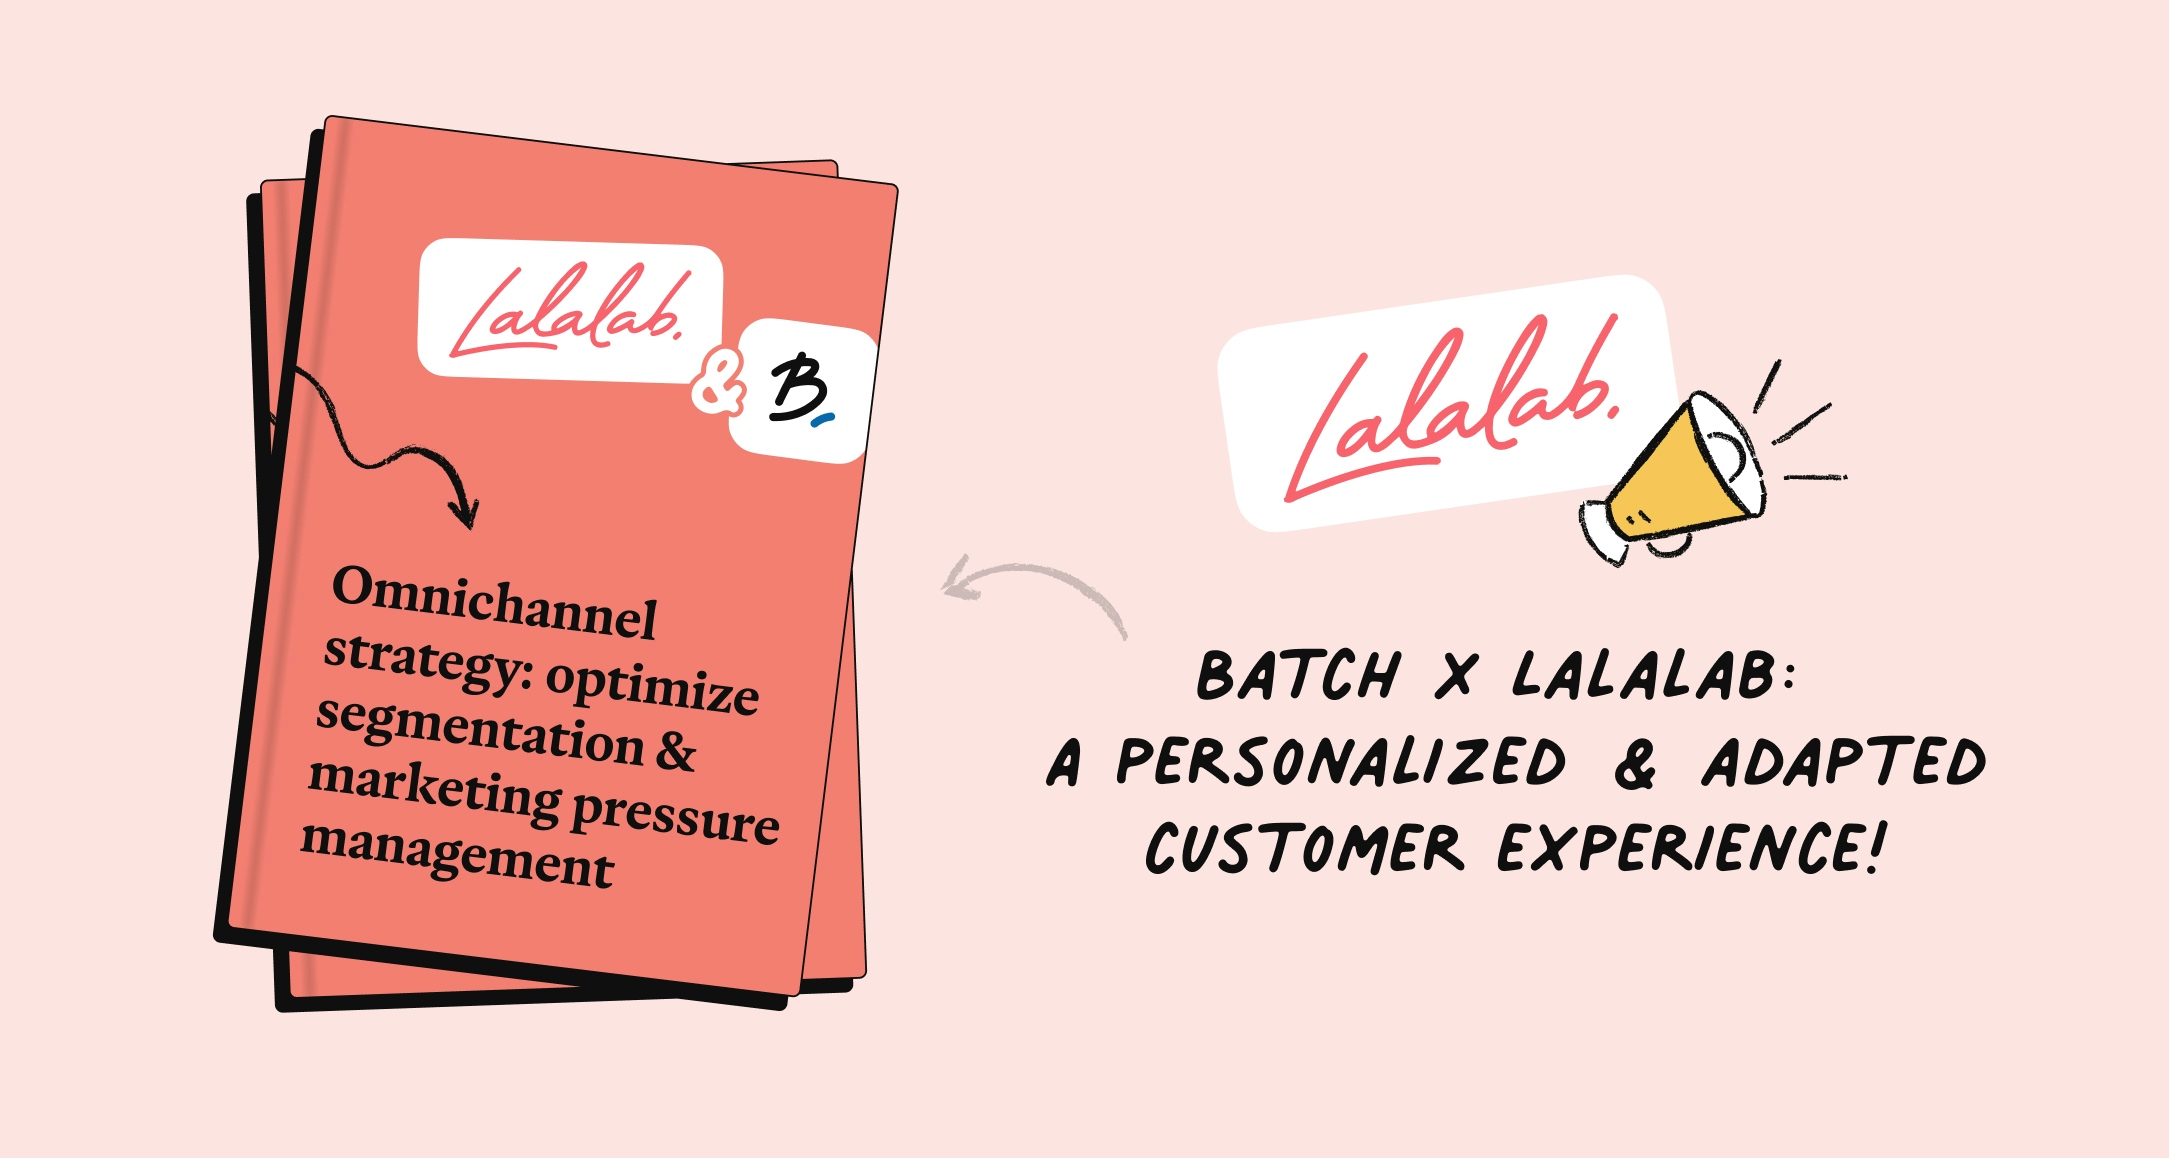 How does Lalalab optimize its segmentation and marketing pressure management? 